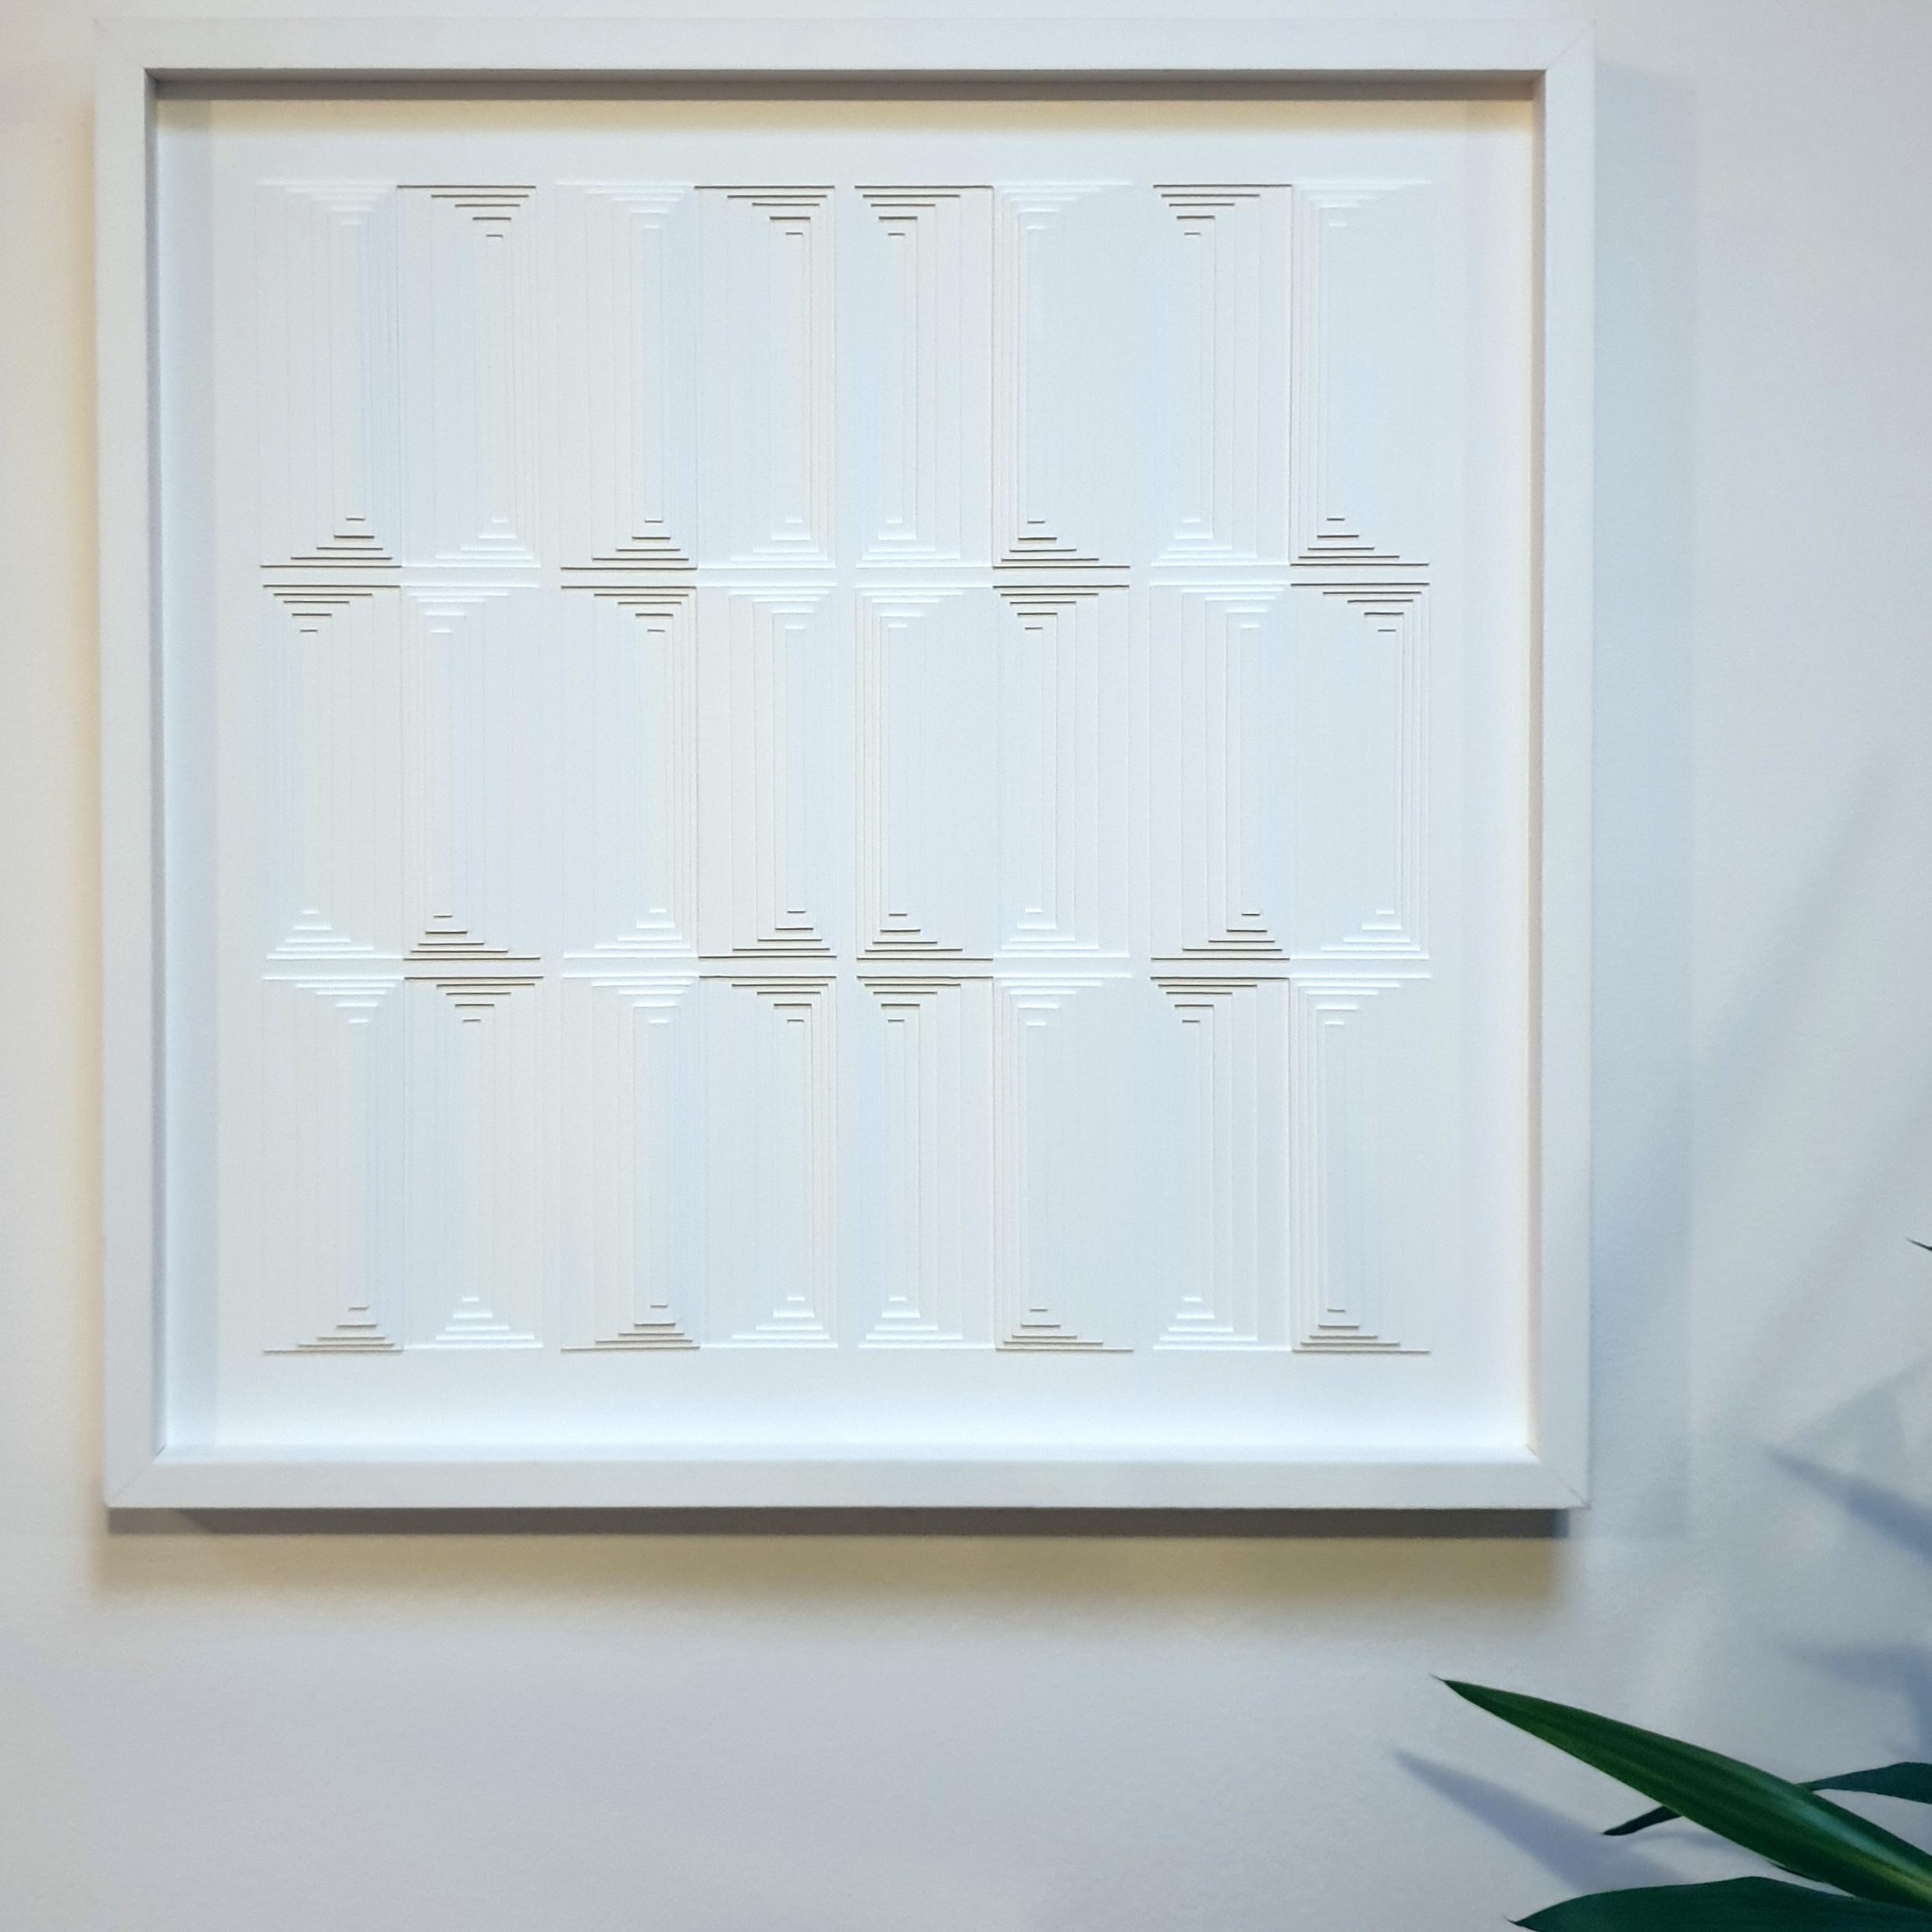 BB1219 - white contemporary modern abstract geometric painting relief - Contemporary Sculpture by Eef de Graaf